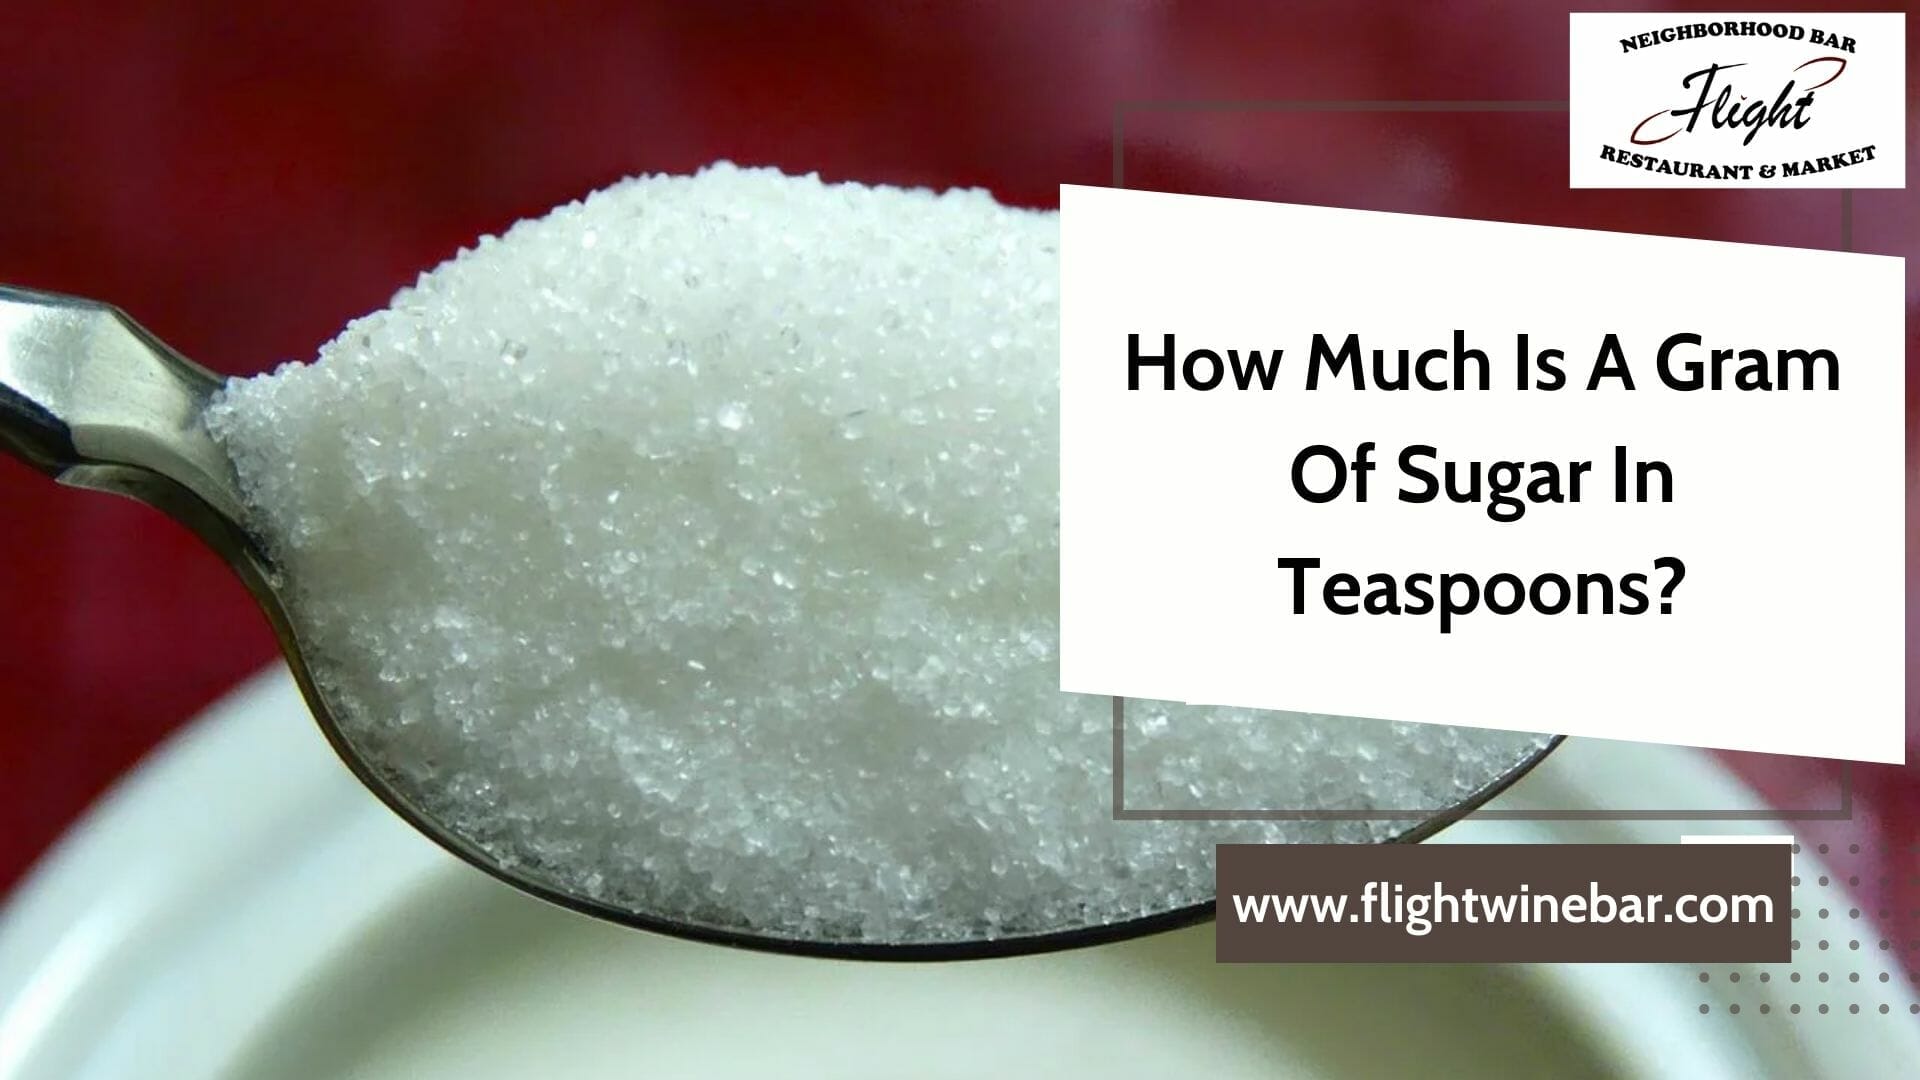 How Much Is A Gram Of Sugar In Teaspoons